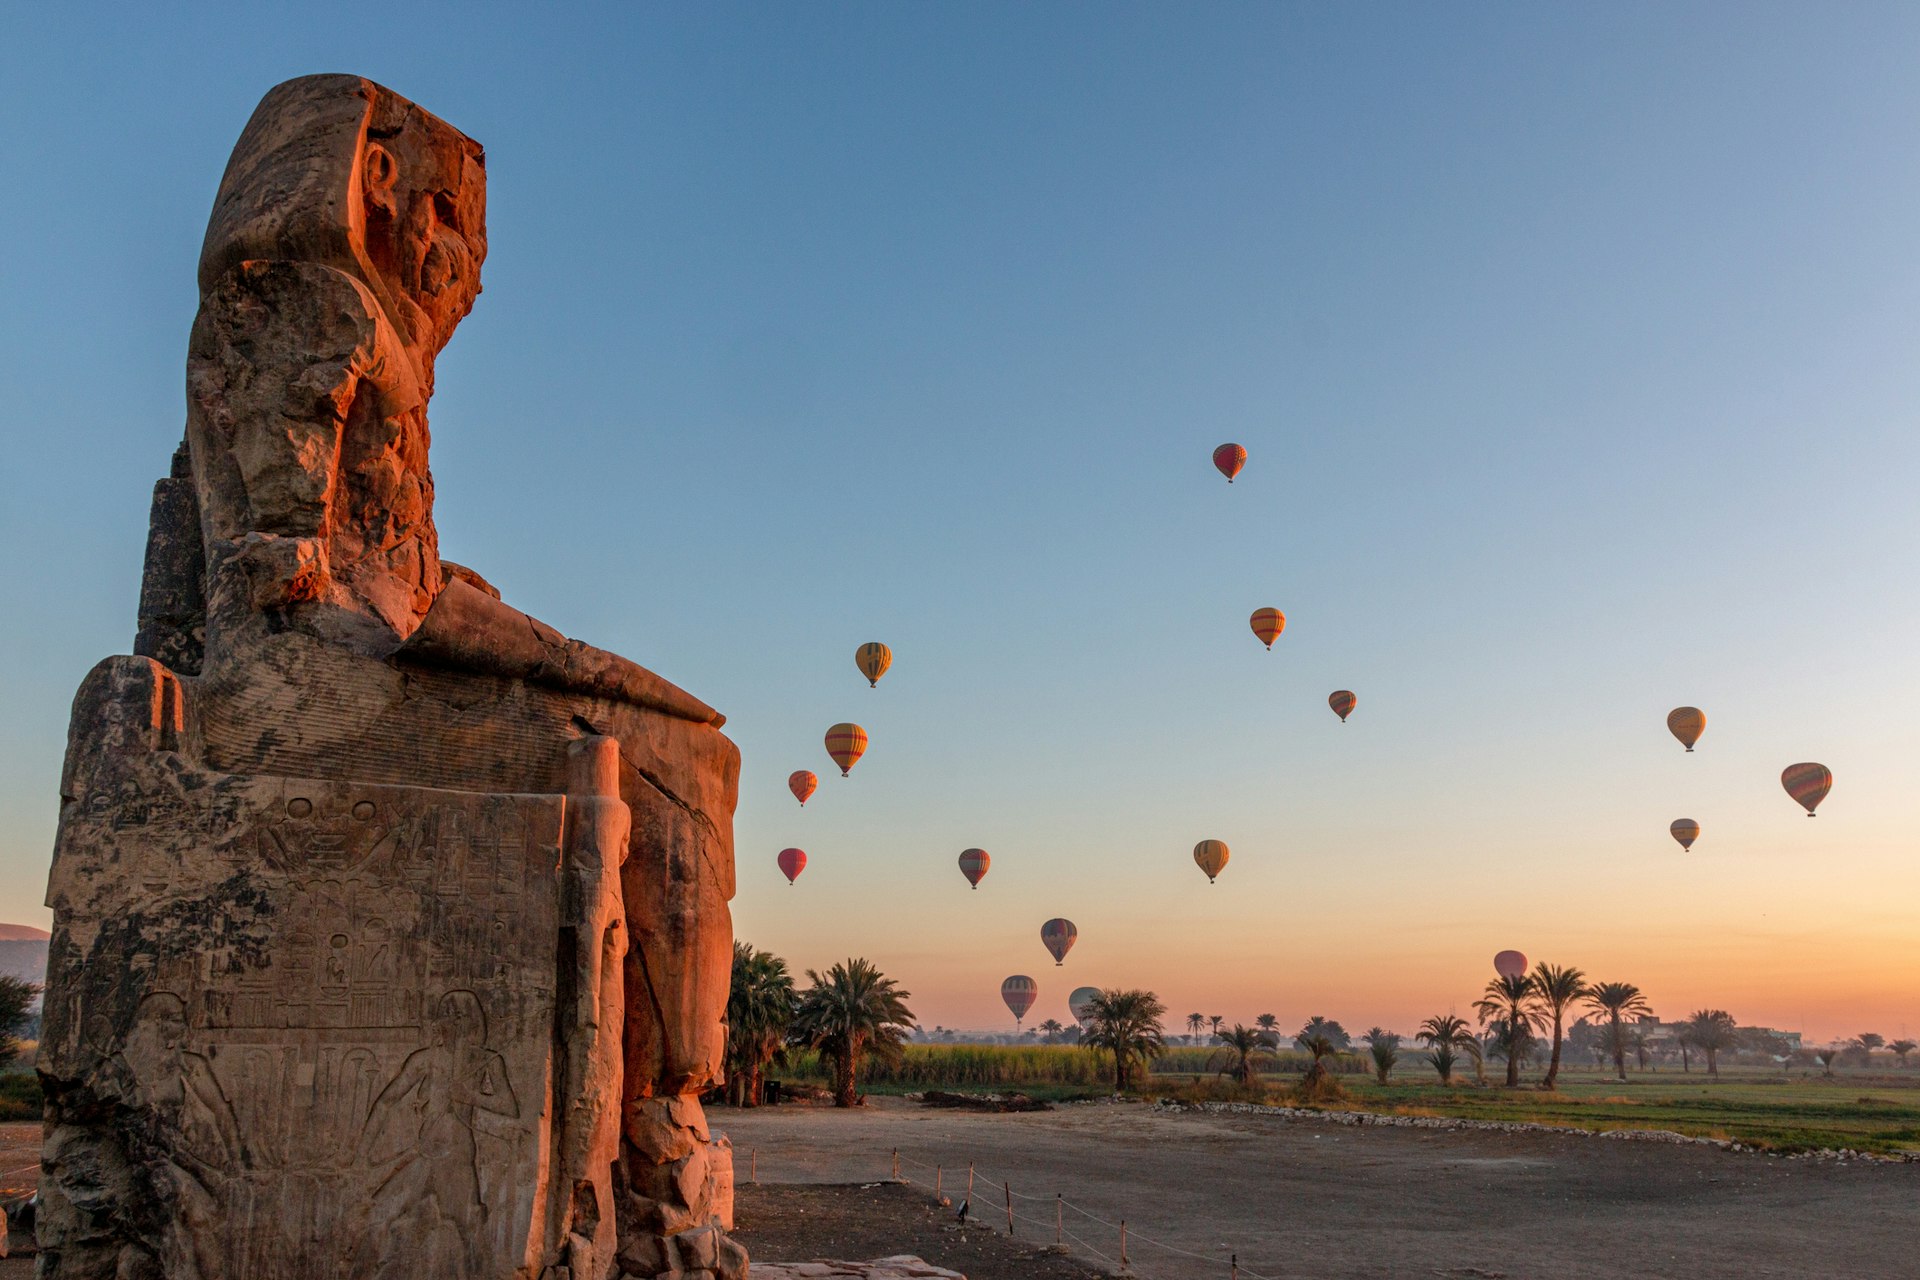 An ancient large stone statue at dawn with hot air balloons in the sky